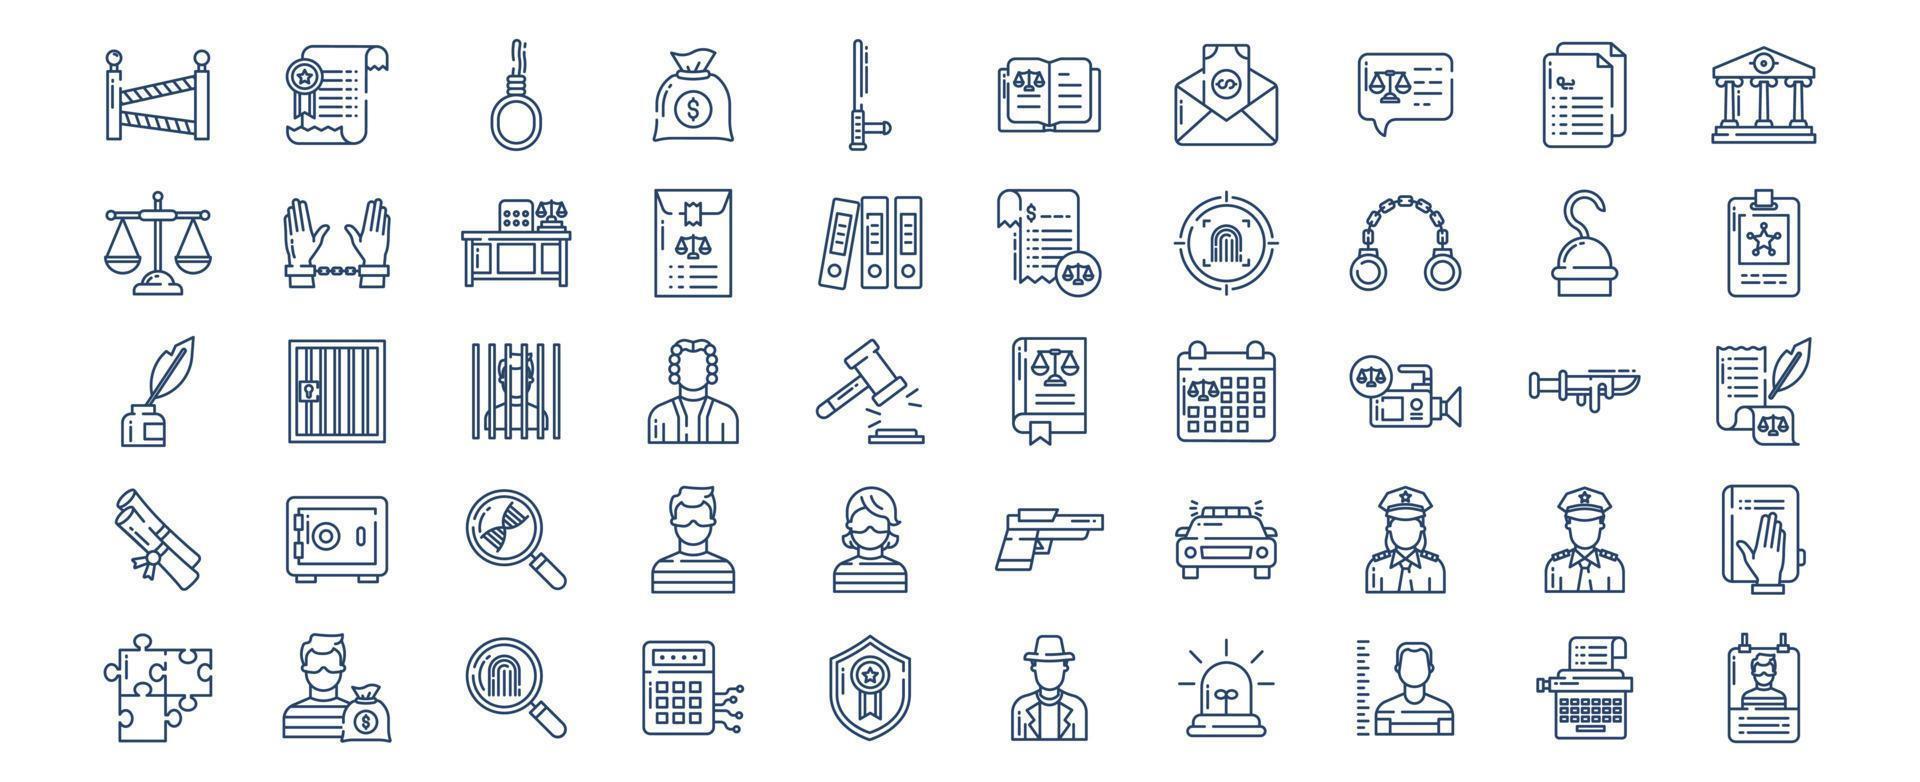 Collection of icons related to Law and Crime, including icons like Police, Custody, Court, Handcuffs and more. vector illustrations, Pixel Perfect set